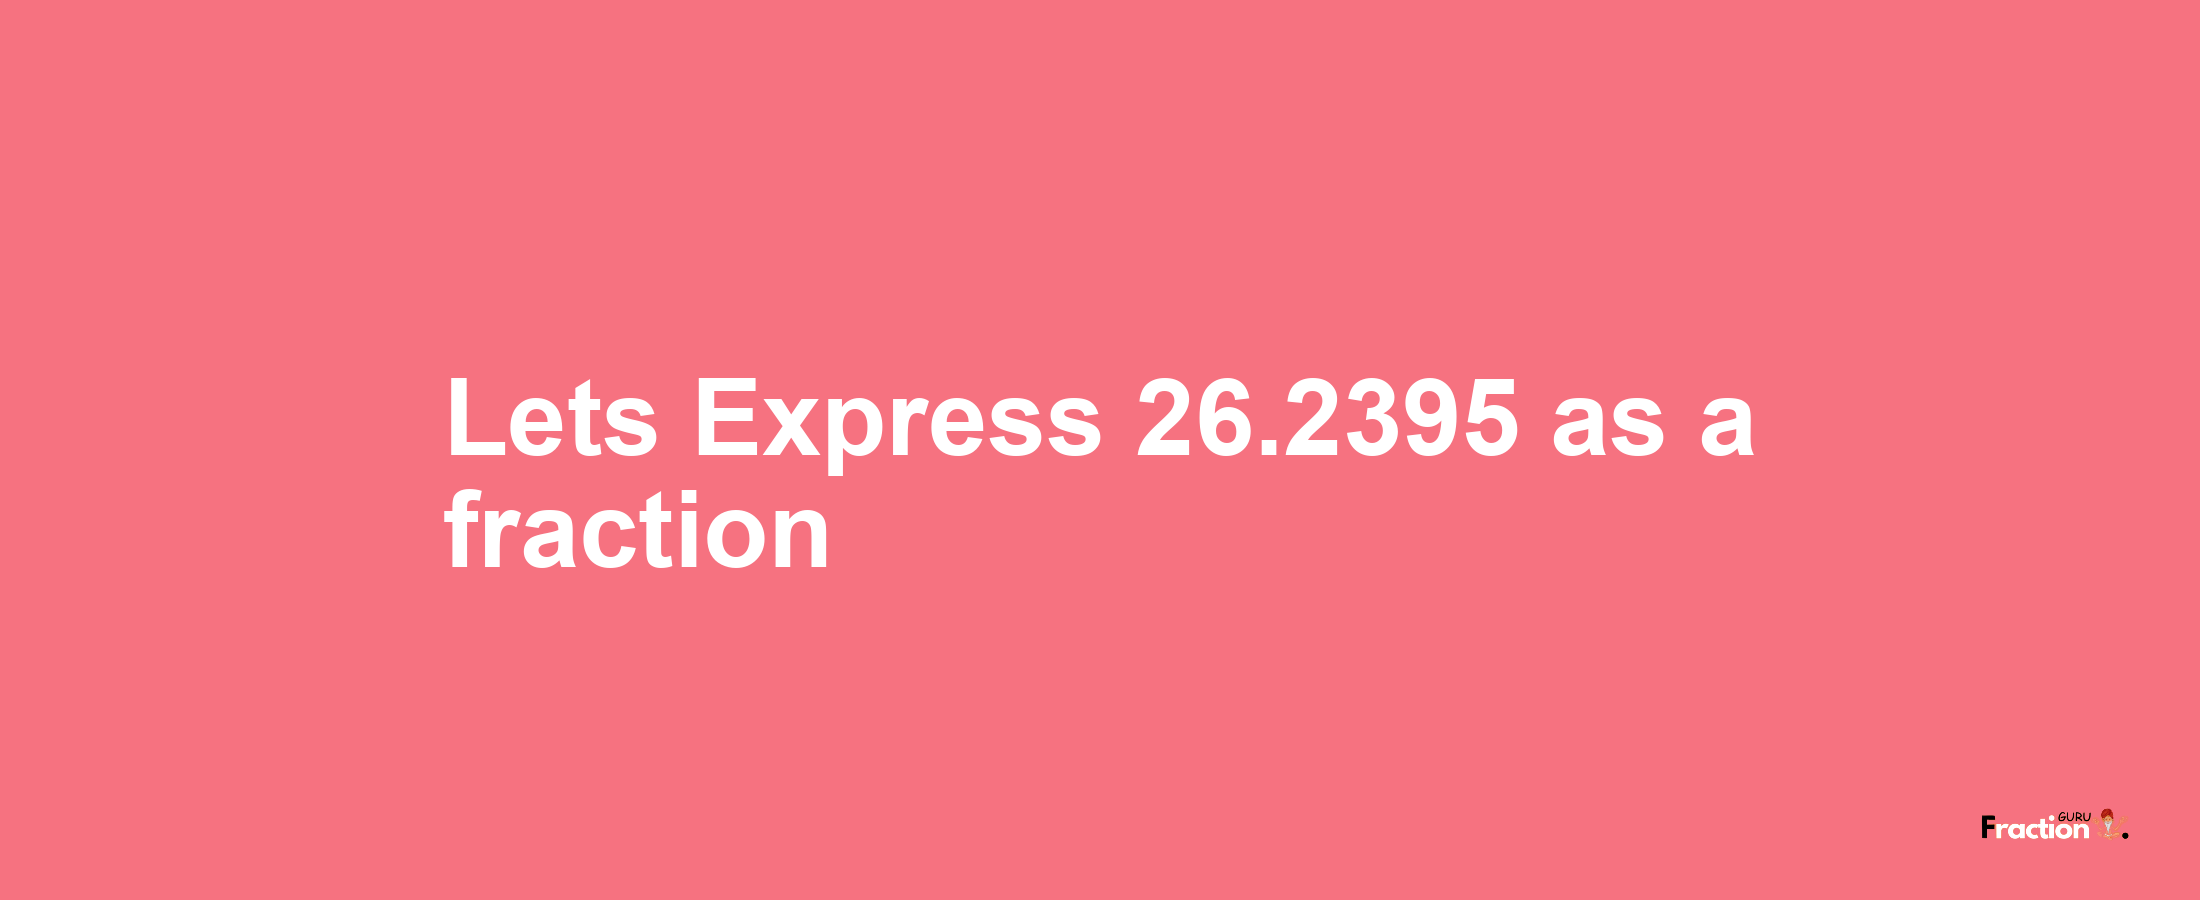 Lets Express 26.2395 as afraction